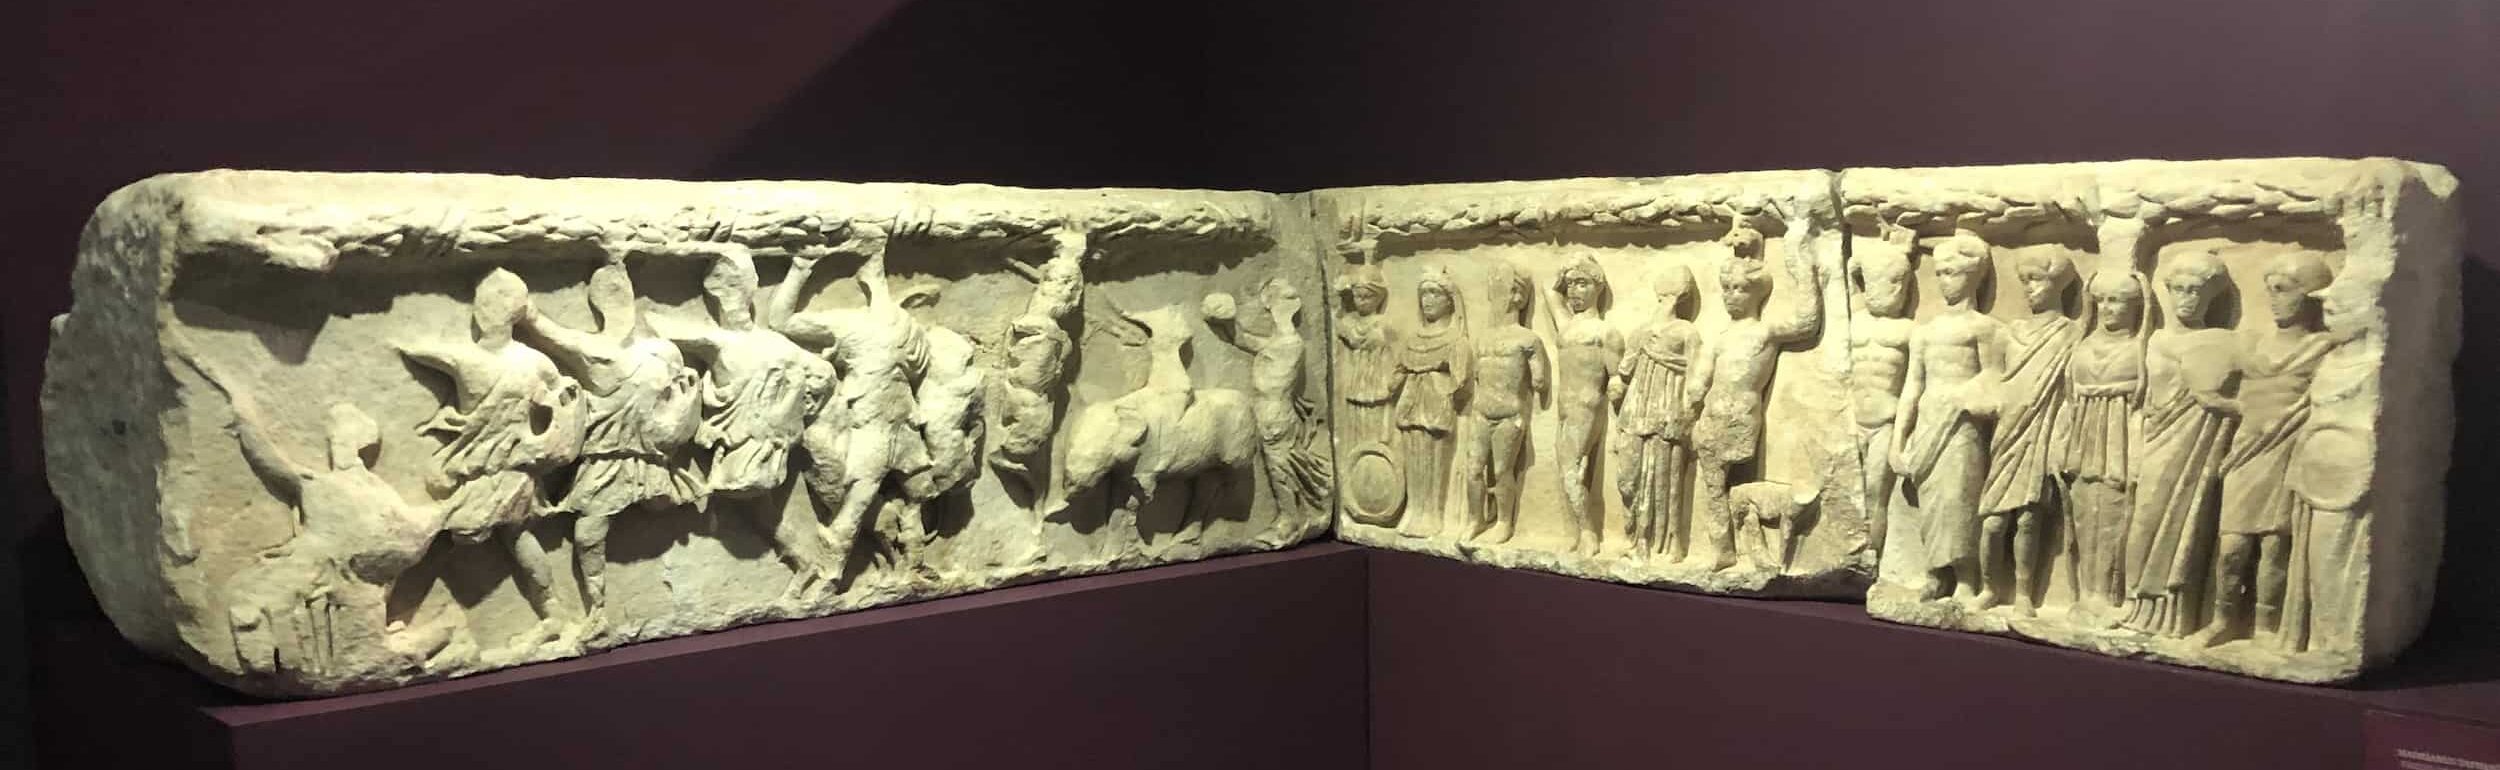 Blocks 3 and 4 on the frieze from the Temple of Hadrian at the Ephesus Museum in Selçuk, Turkey